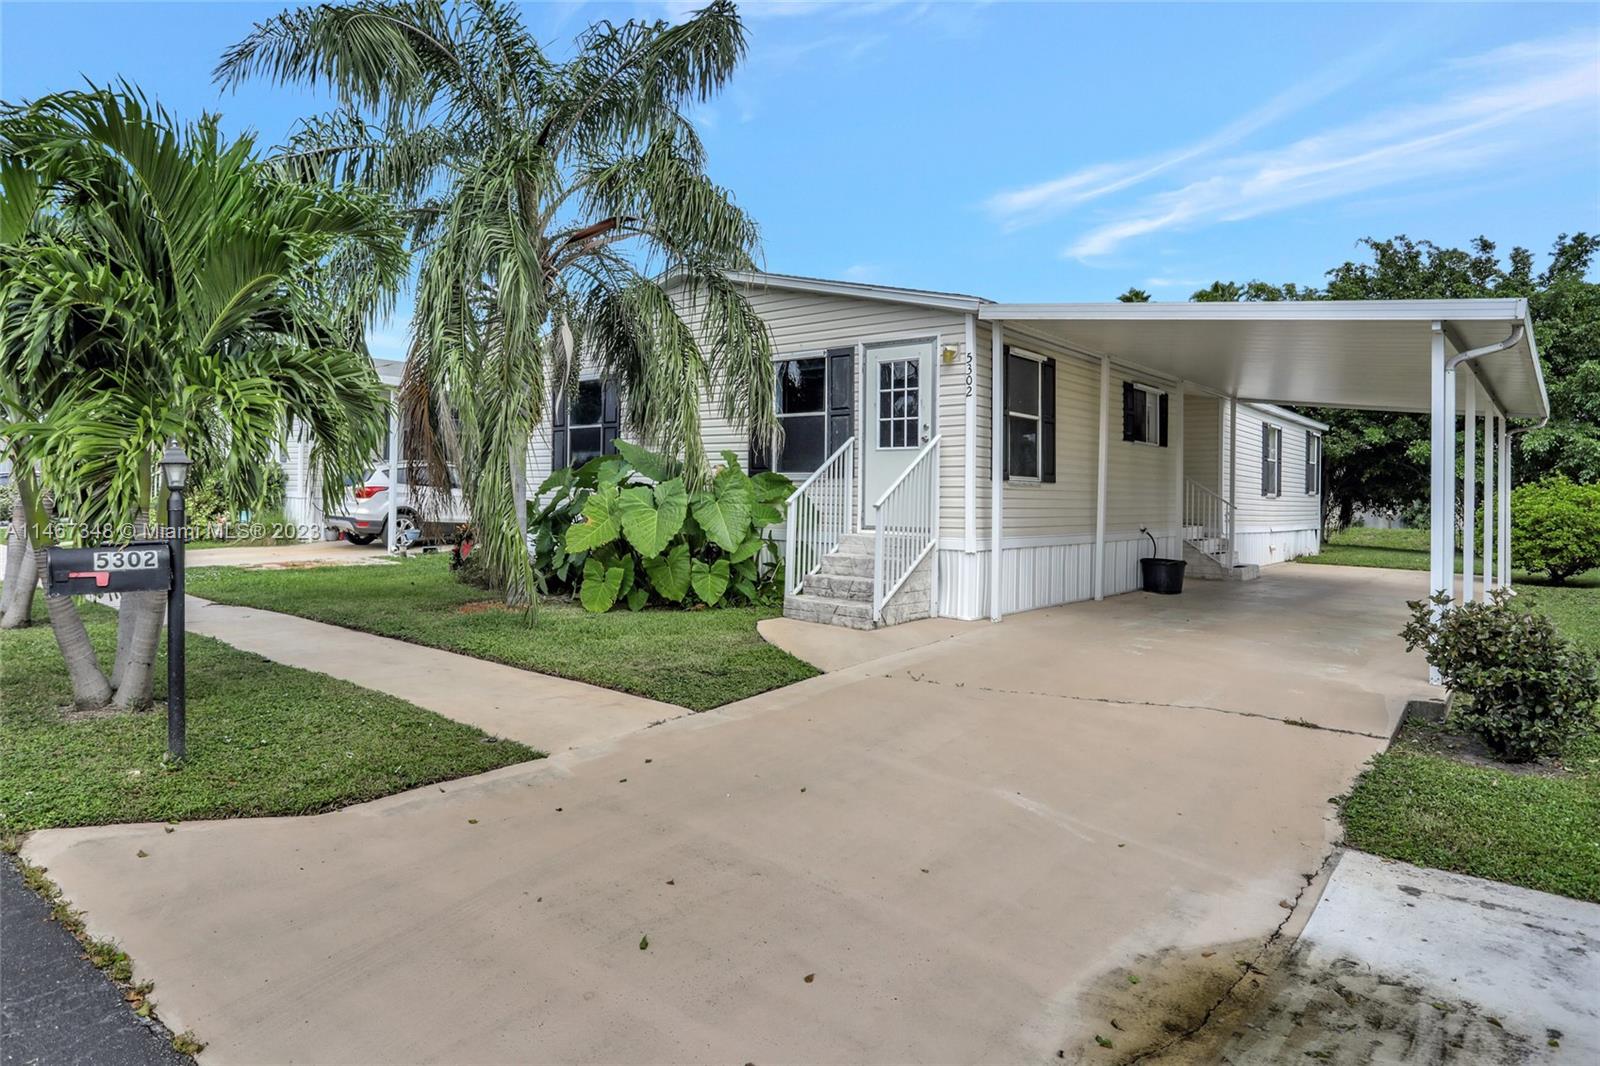 5302 NW 1st Ave, Deerfield Beach, Florida 33064, 3 Bedrooms Bedrooms, 7 Rooms Rooms,2 BathroomsBathrooms,Residential,For Sale,5302 NW 1st Ave,A11467348